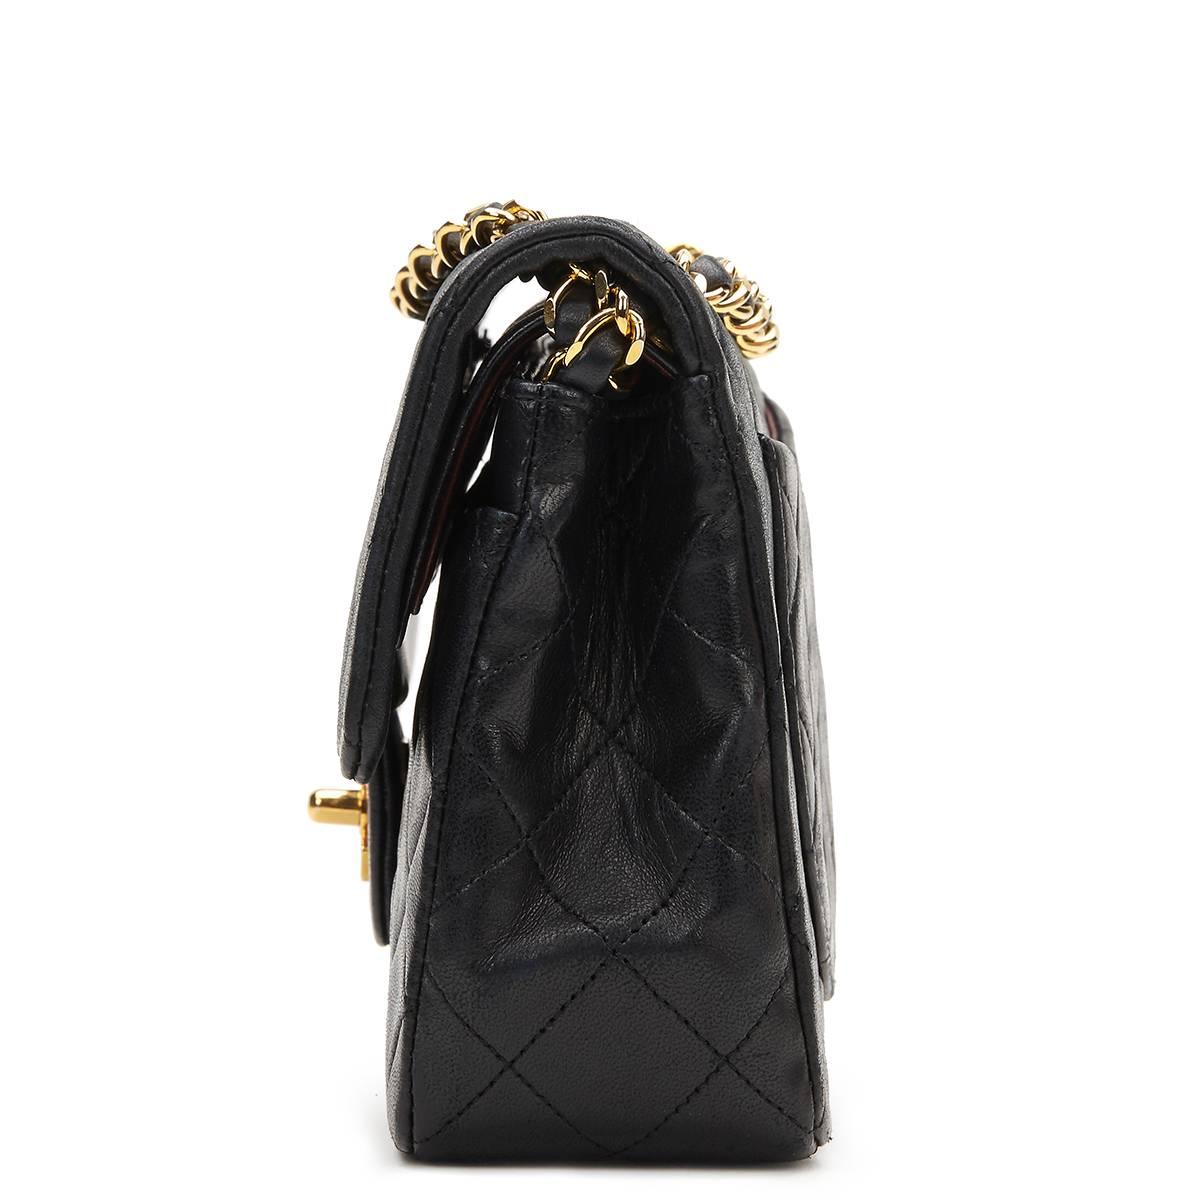 CHANEL
Black Quilted Lambskin Vintage Small Classic Double Flap Bag

This CHANEL Small Classic Double Flap Bag is in Very Good Pre-Owned Condition accompanied by Chanel Dust Bag, Box. Circa 1991. Primarily made from Lambskin Leather complimented by